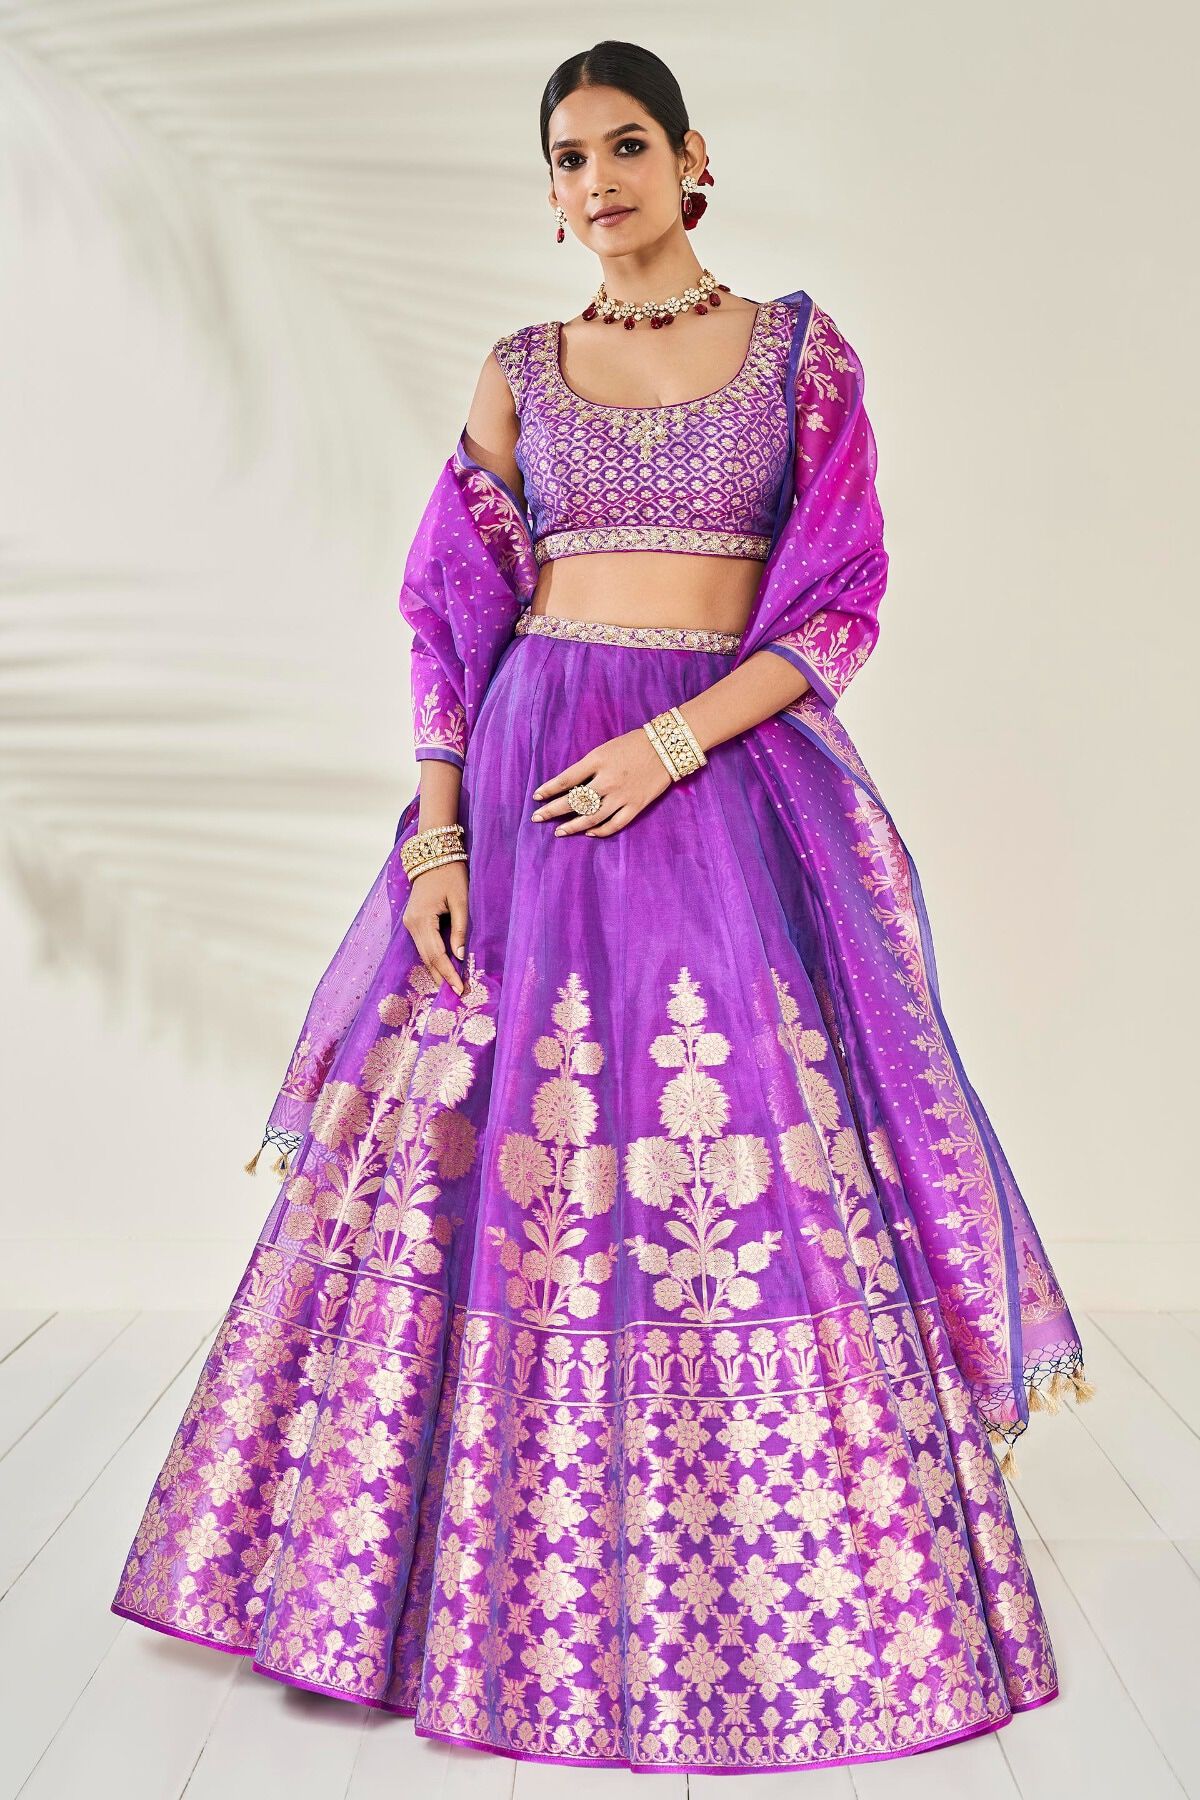 Hina Khan gives an edgy and modern twist to Indian wear in deep purple  lehenga | Fashion Trends - Hindustan Times